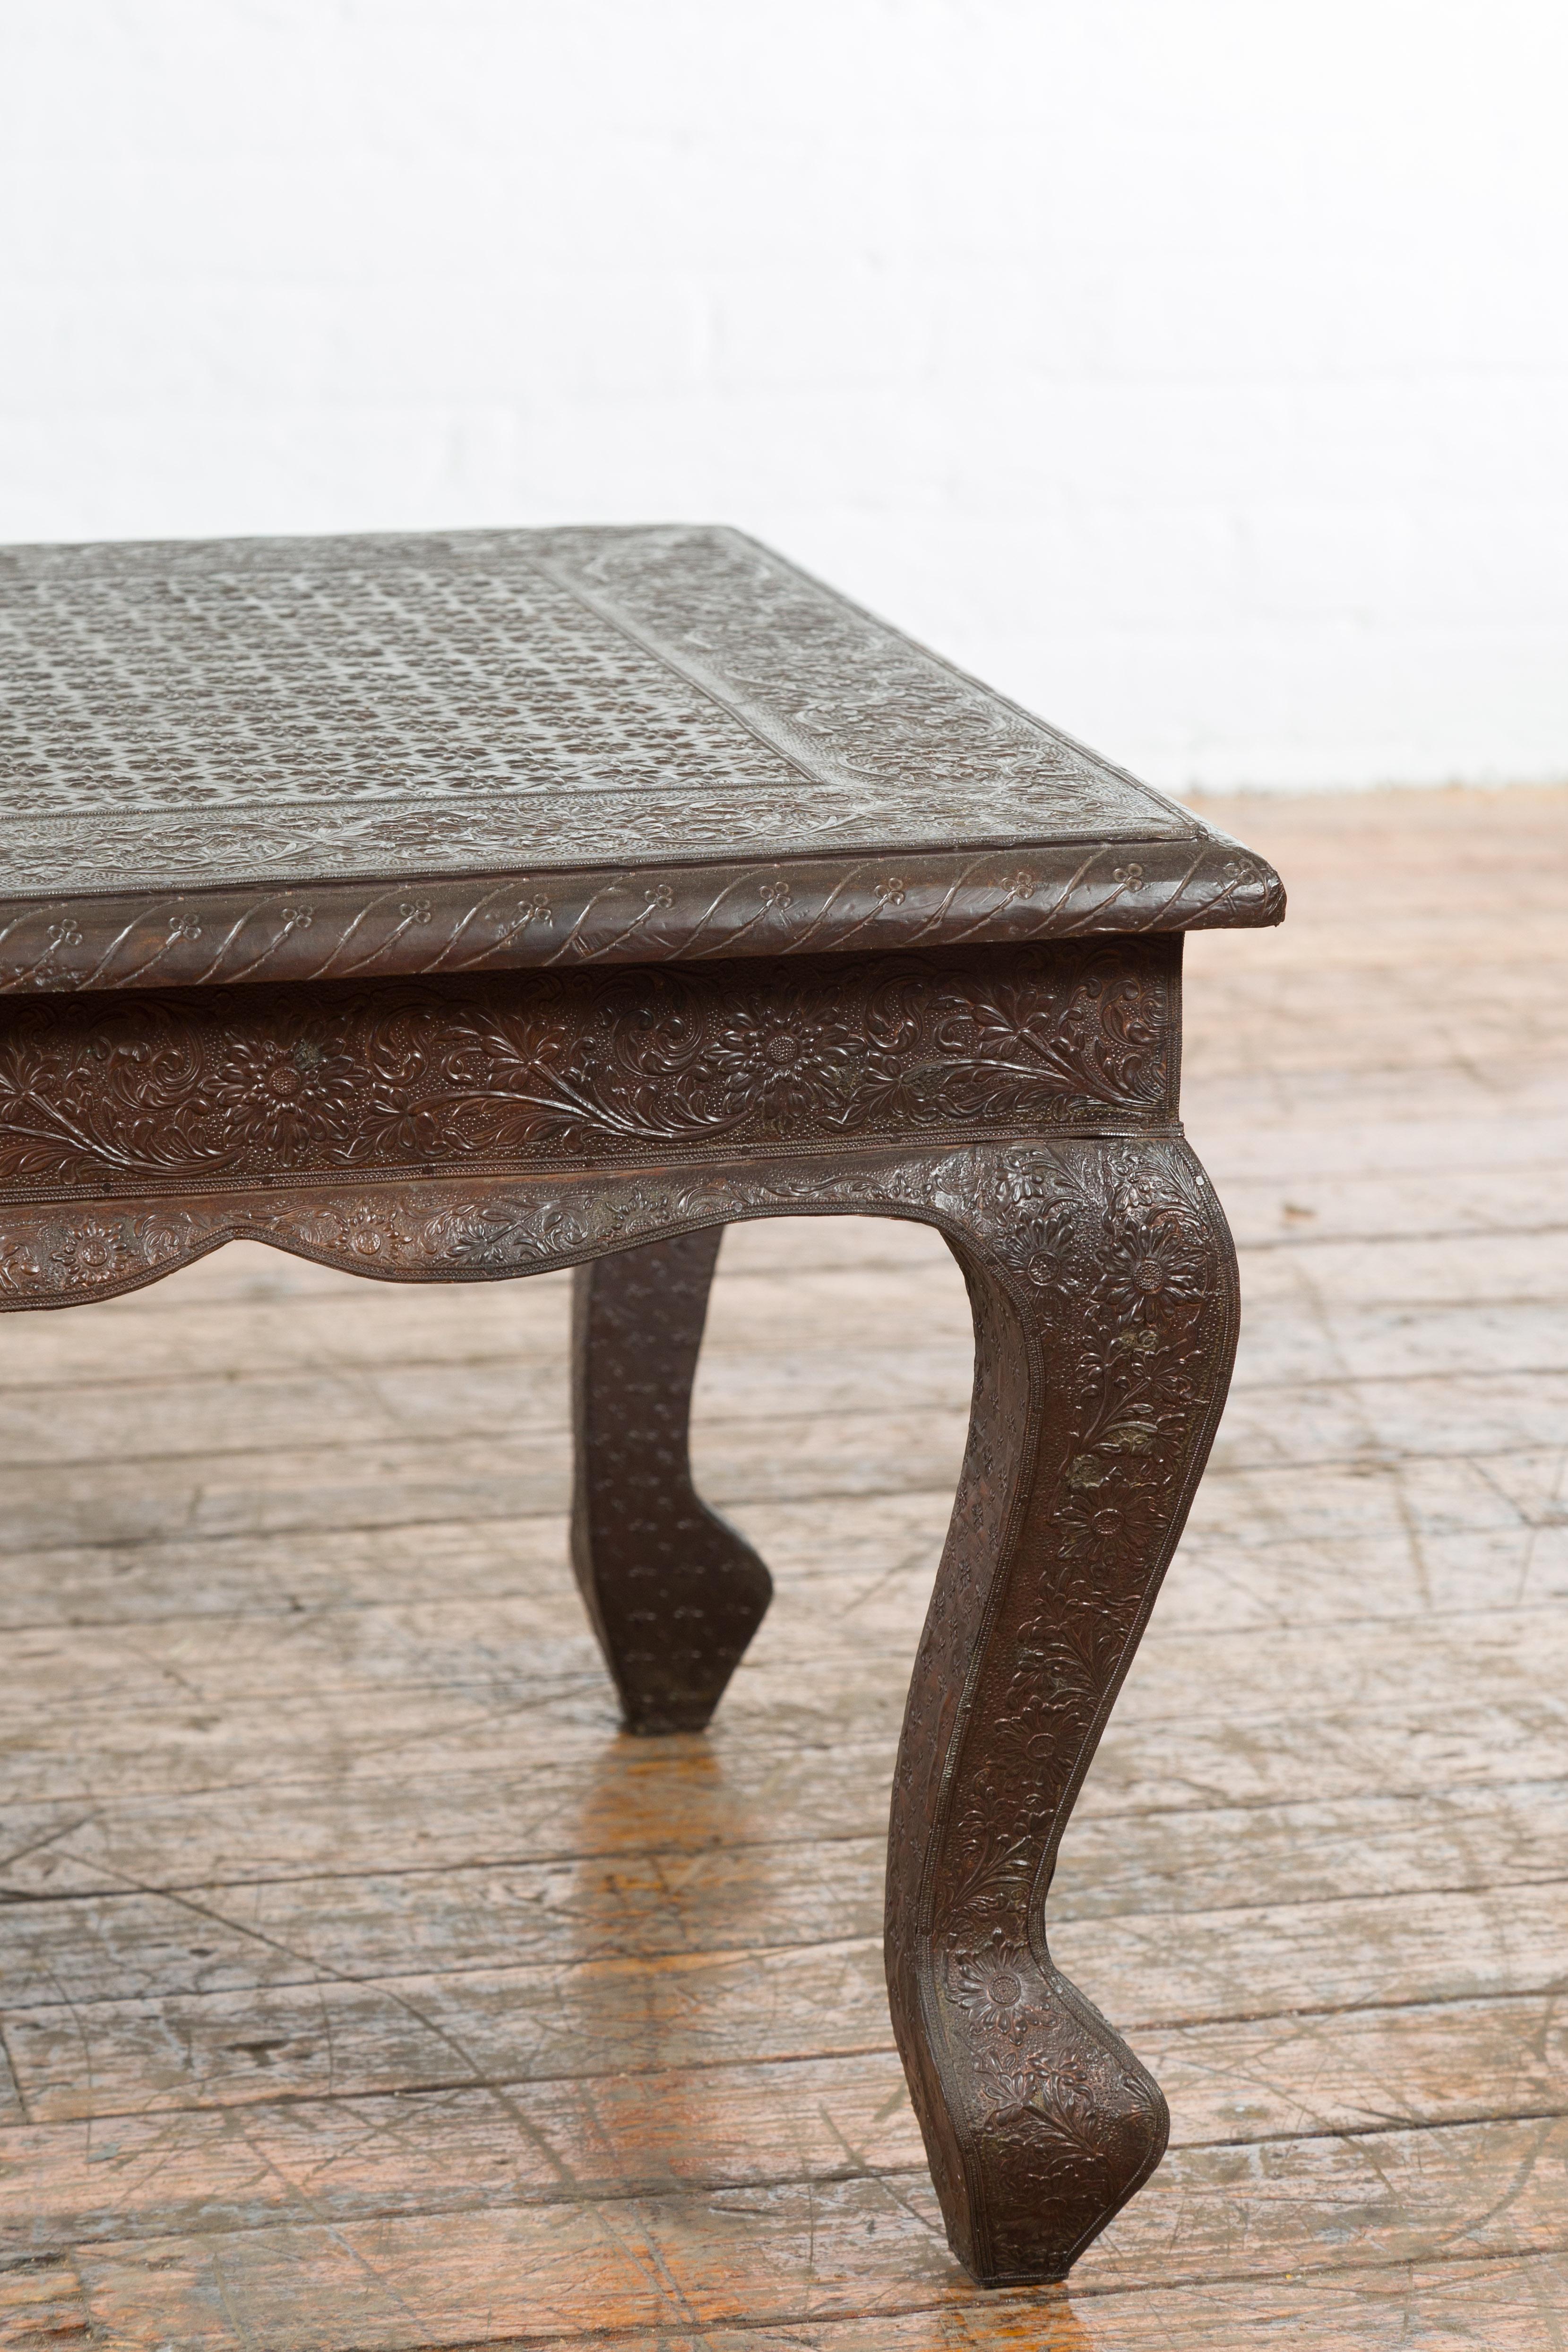 20th Century Vintage Indian Coffee Table with Embossed Floral Design and Cabriole Legs For Sale